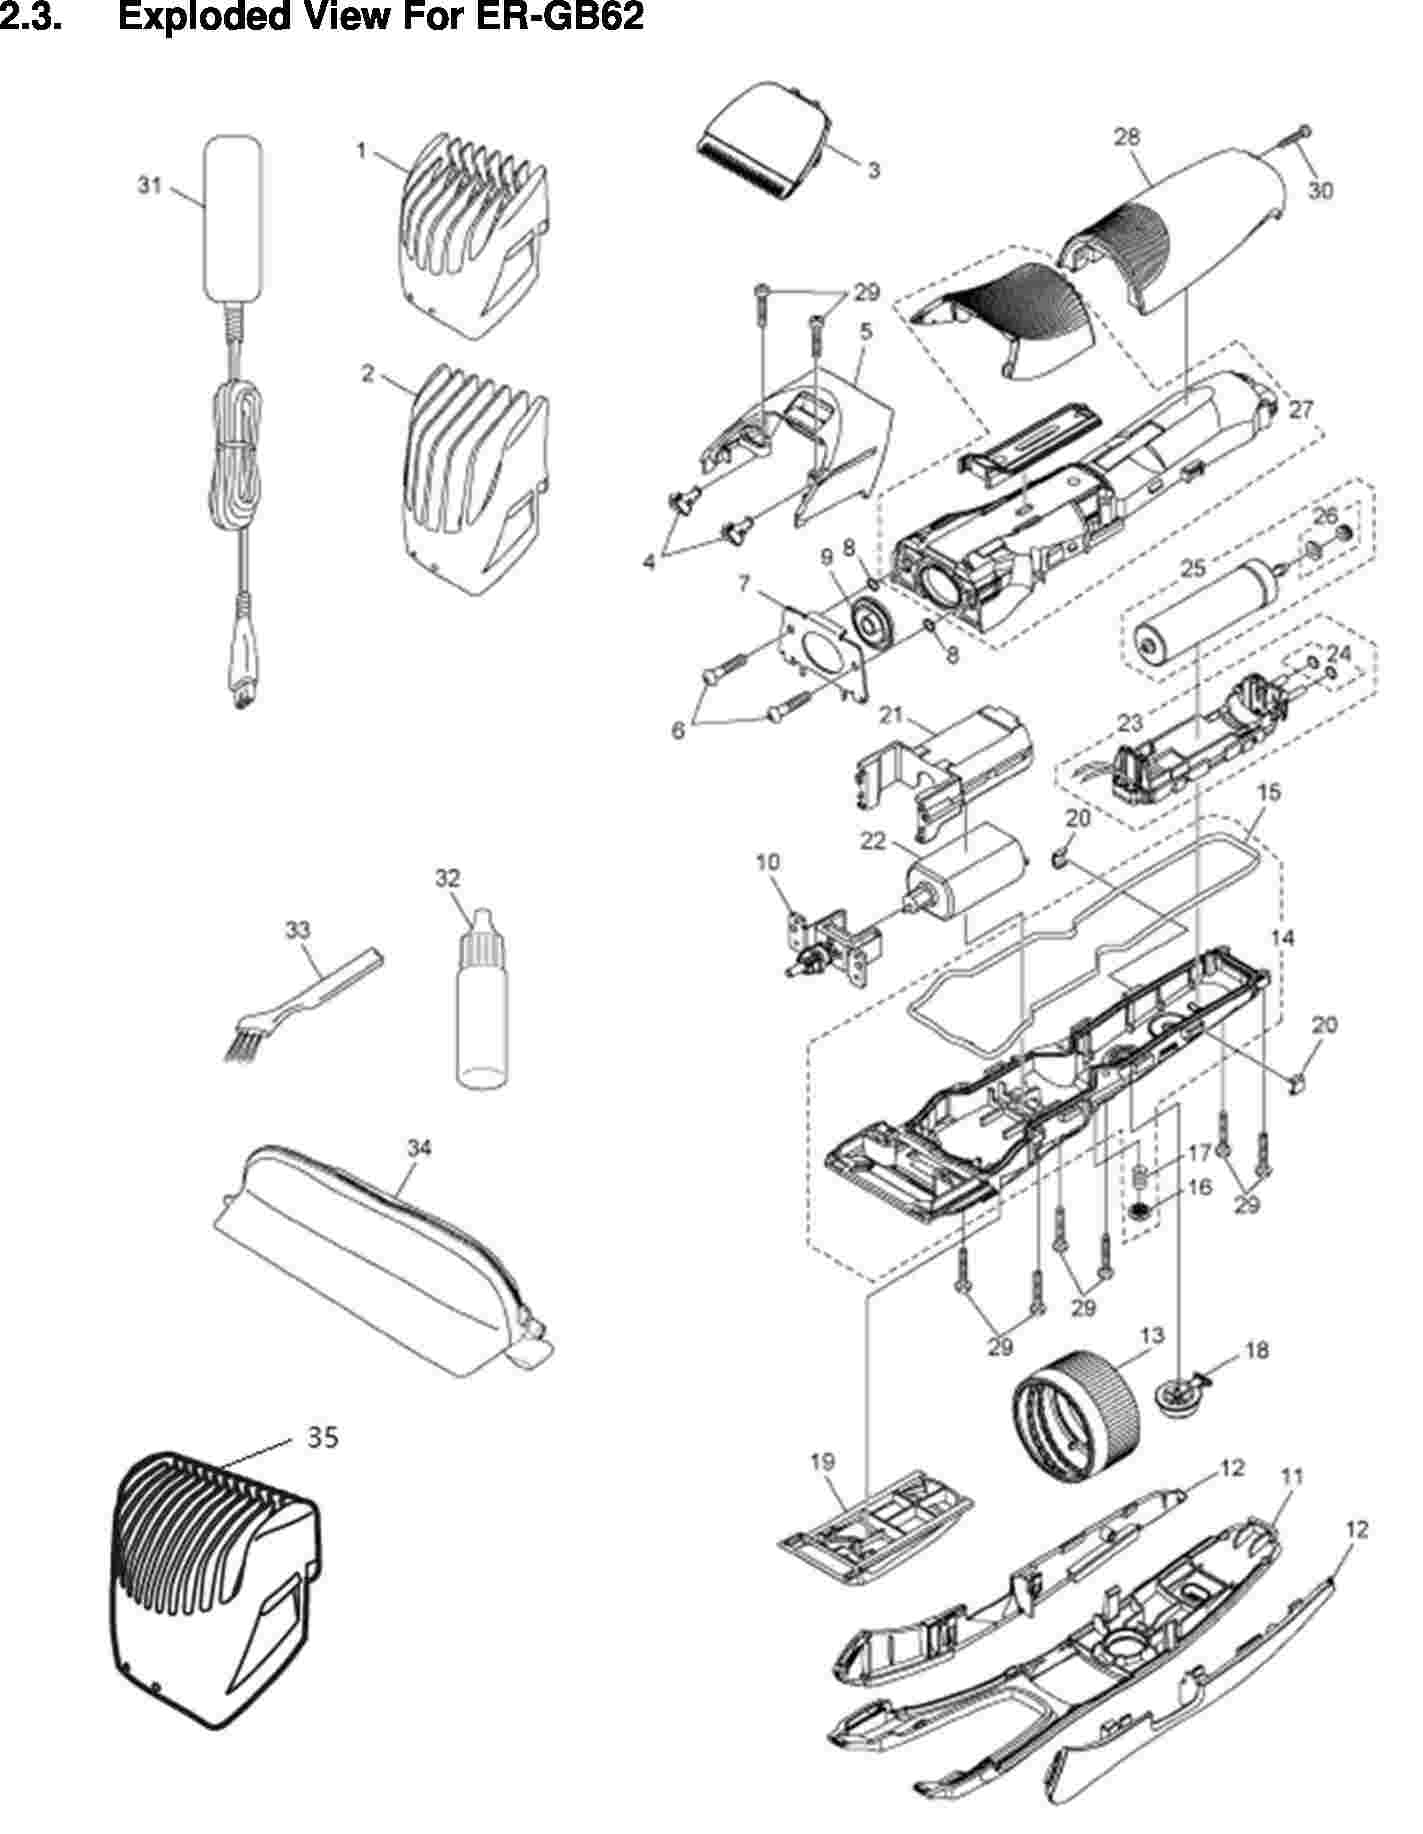 : Exploded View